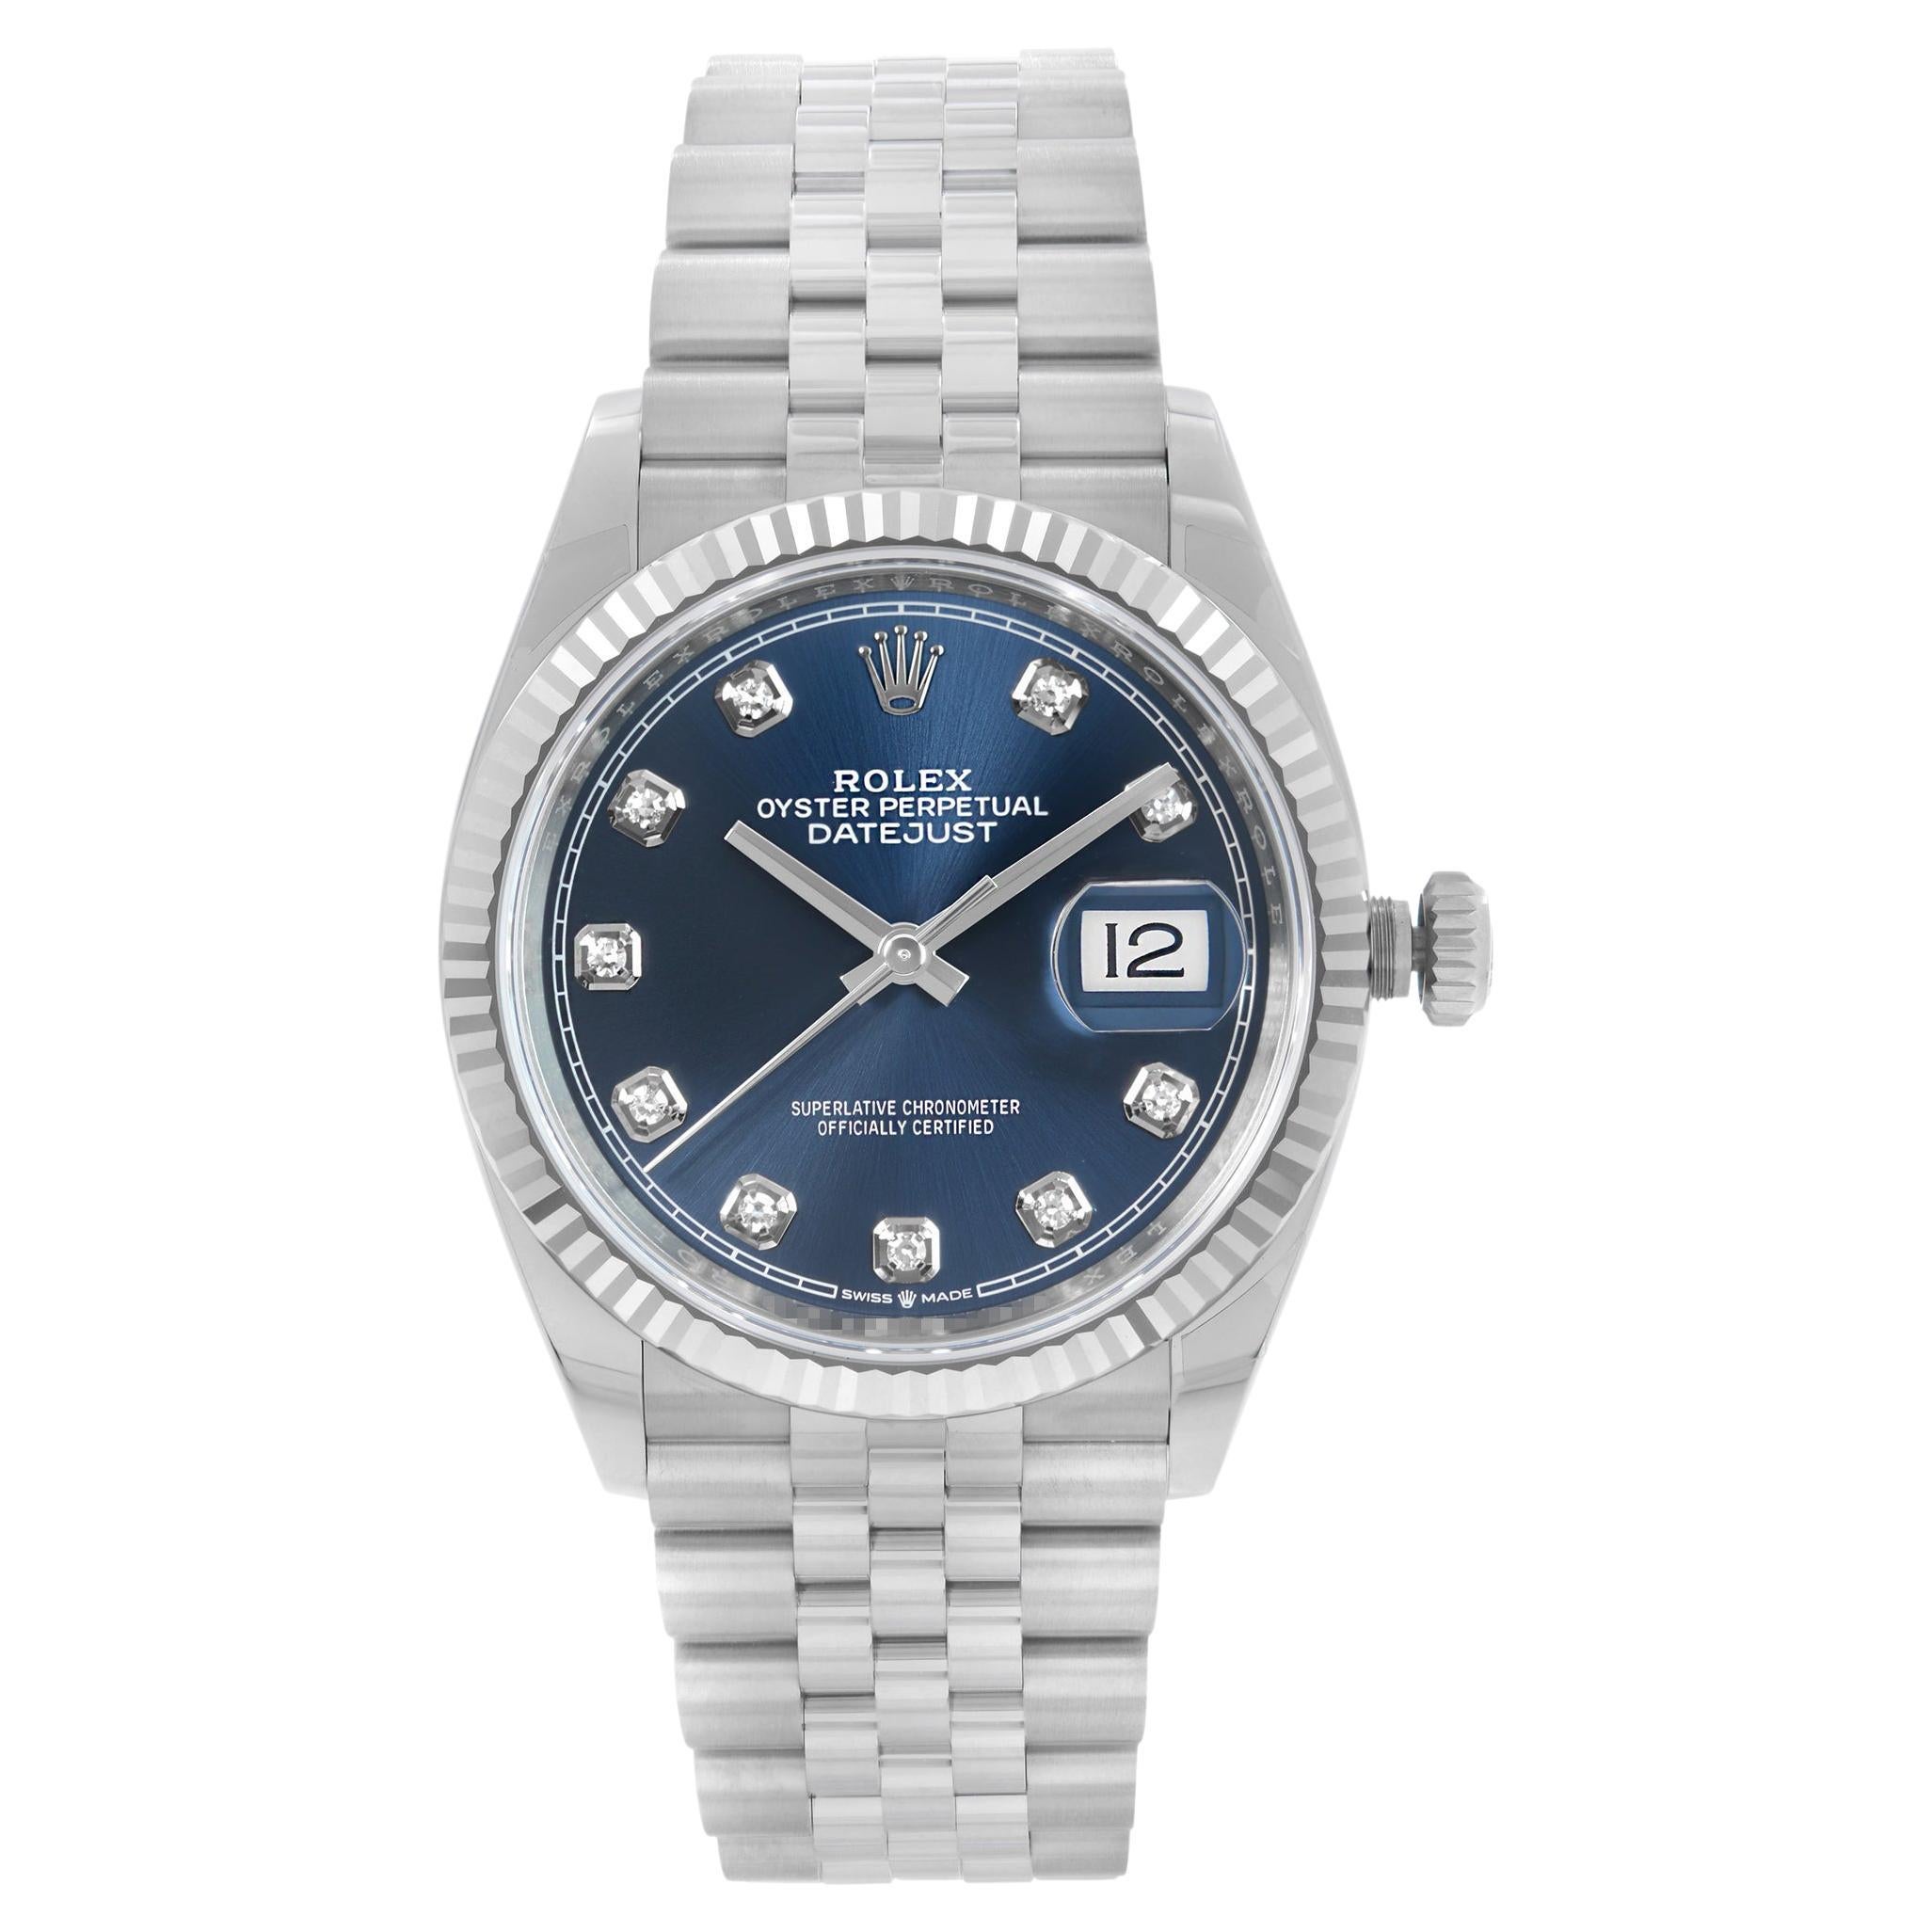 Rolex Datejust 36 18k White Gold Steel Blue Diamond Dial Automatic Watch 126234 For Sale